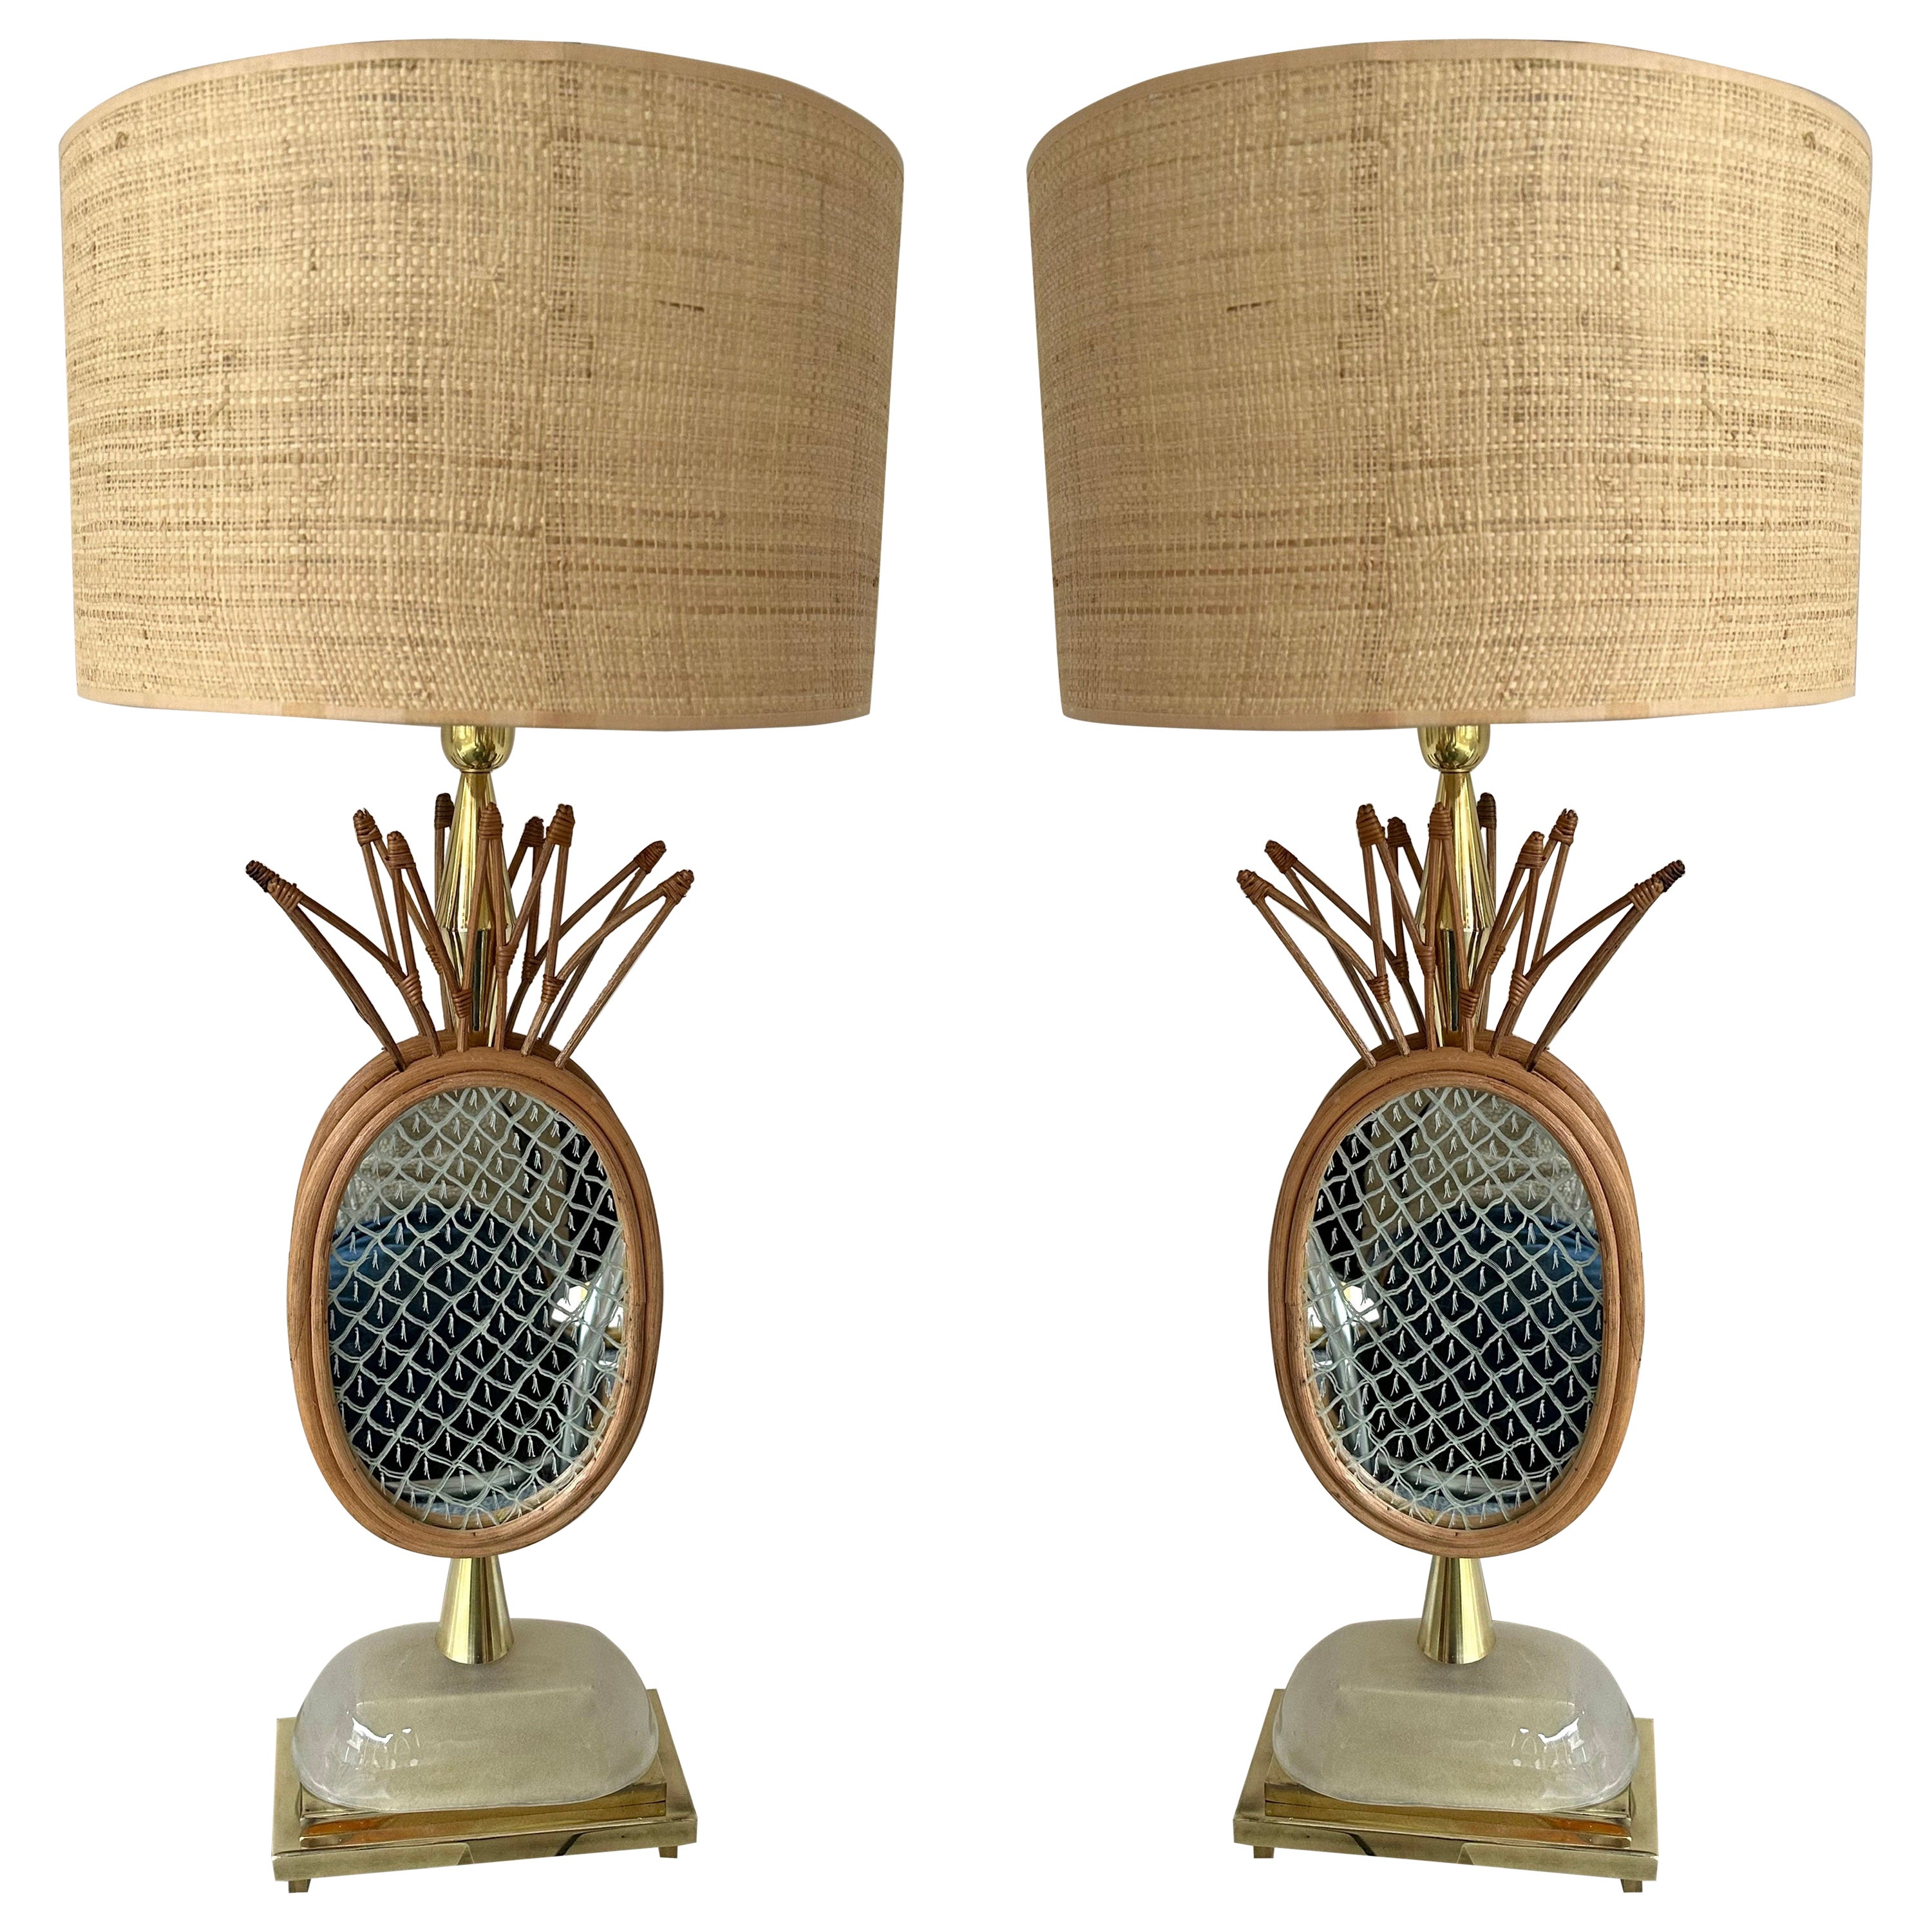 Contemporary Pair of Brass and Rattan Pineapple Mirror Lamps, Italy